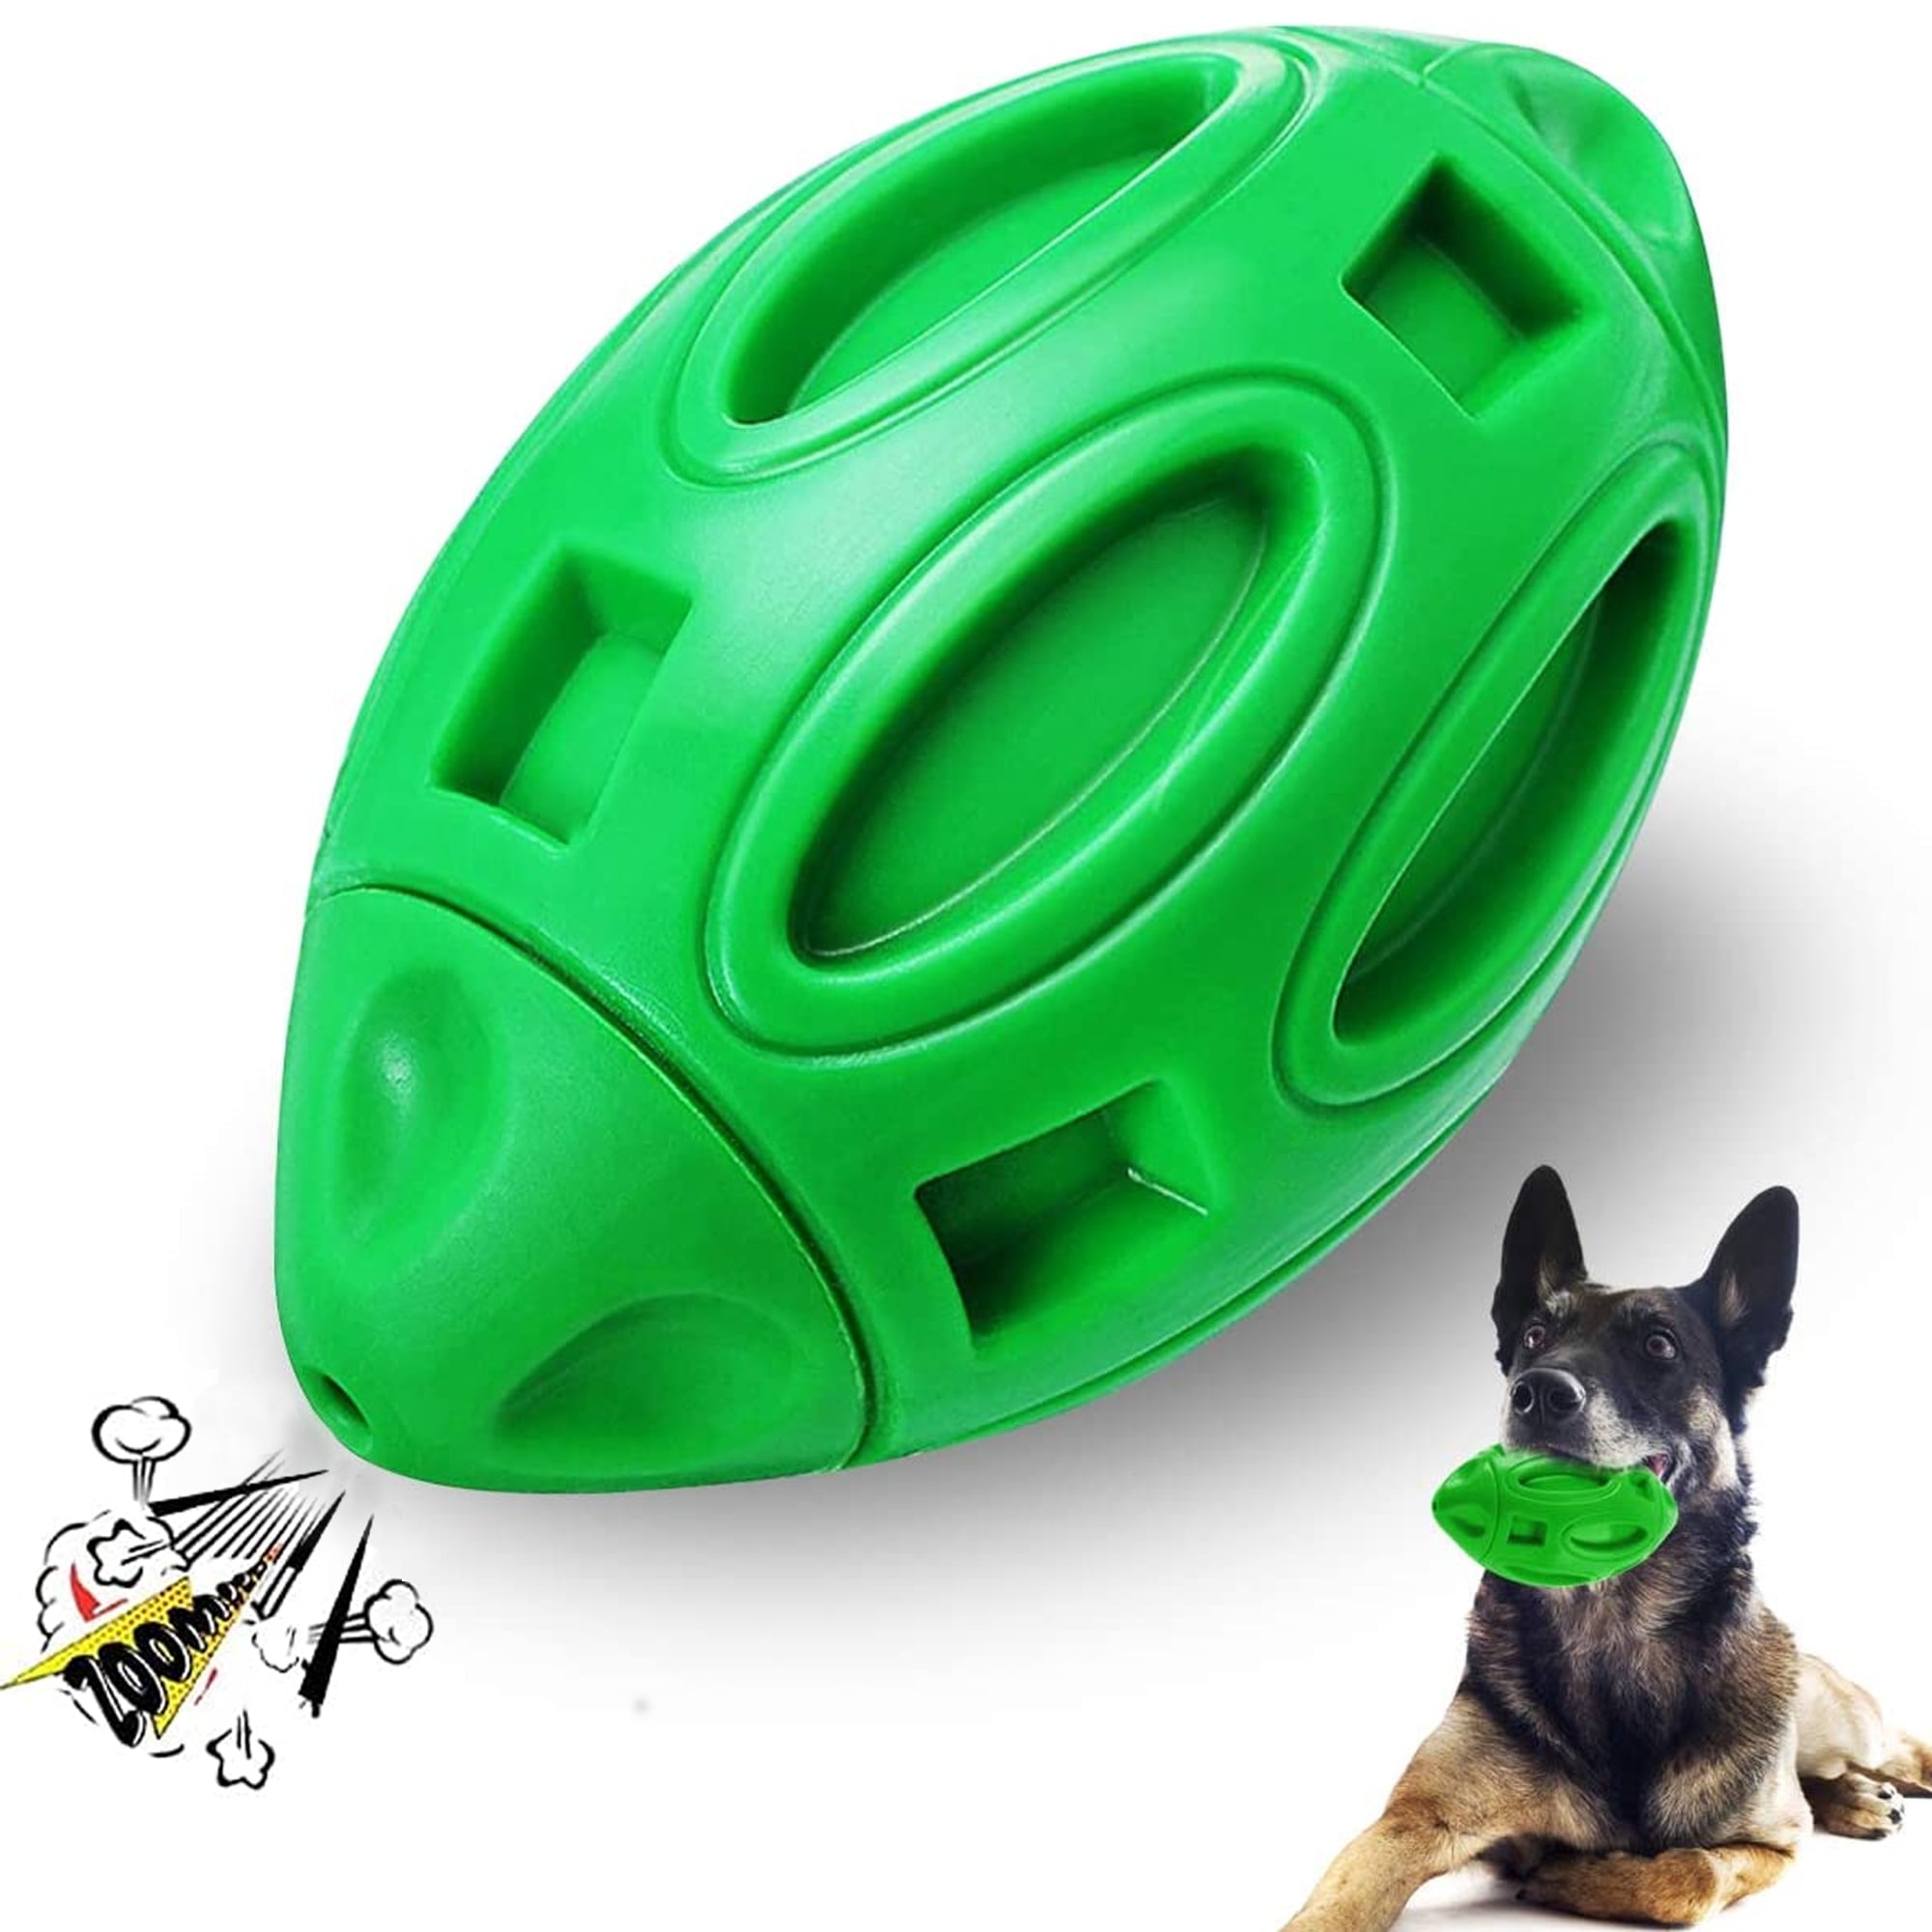 LPHSNR Upgrade Tough Dog Toys for Aggressive Chewers Large Breed